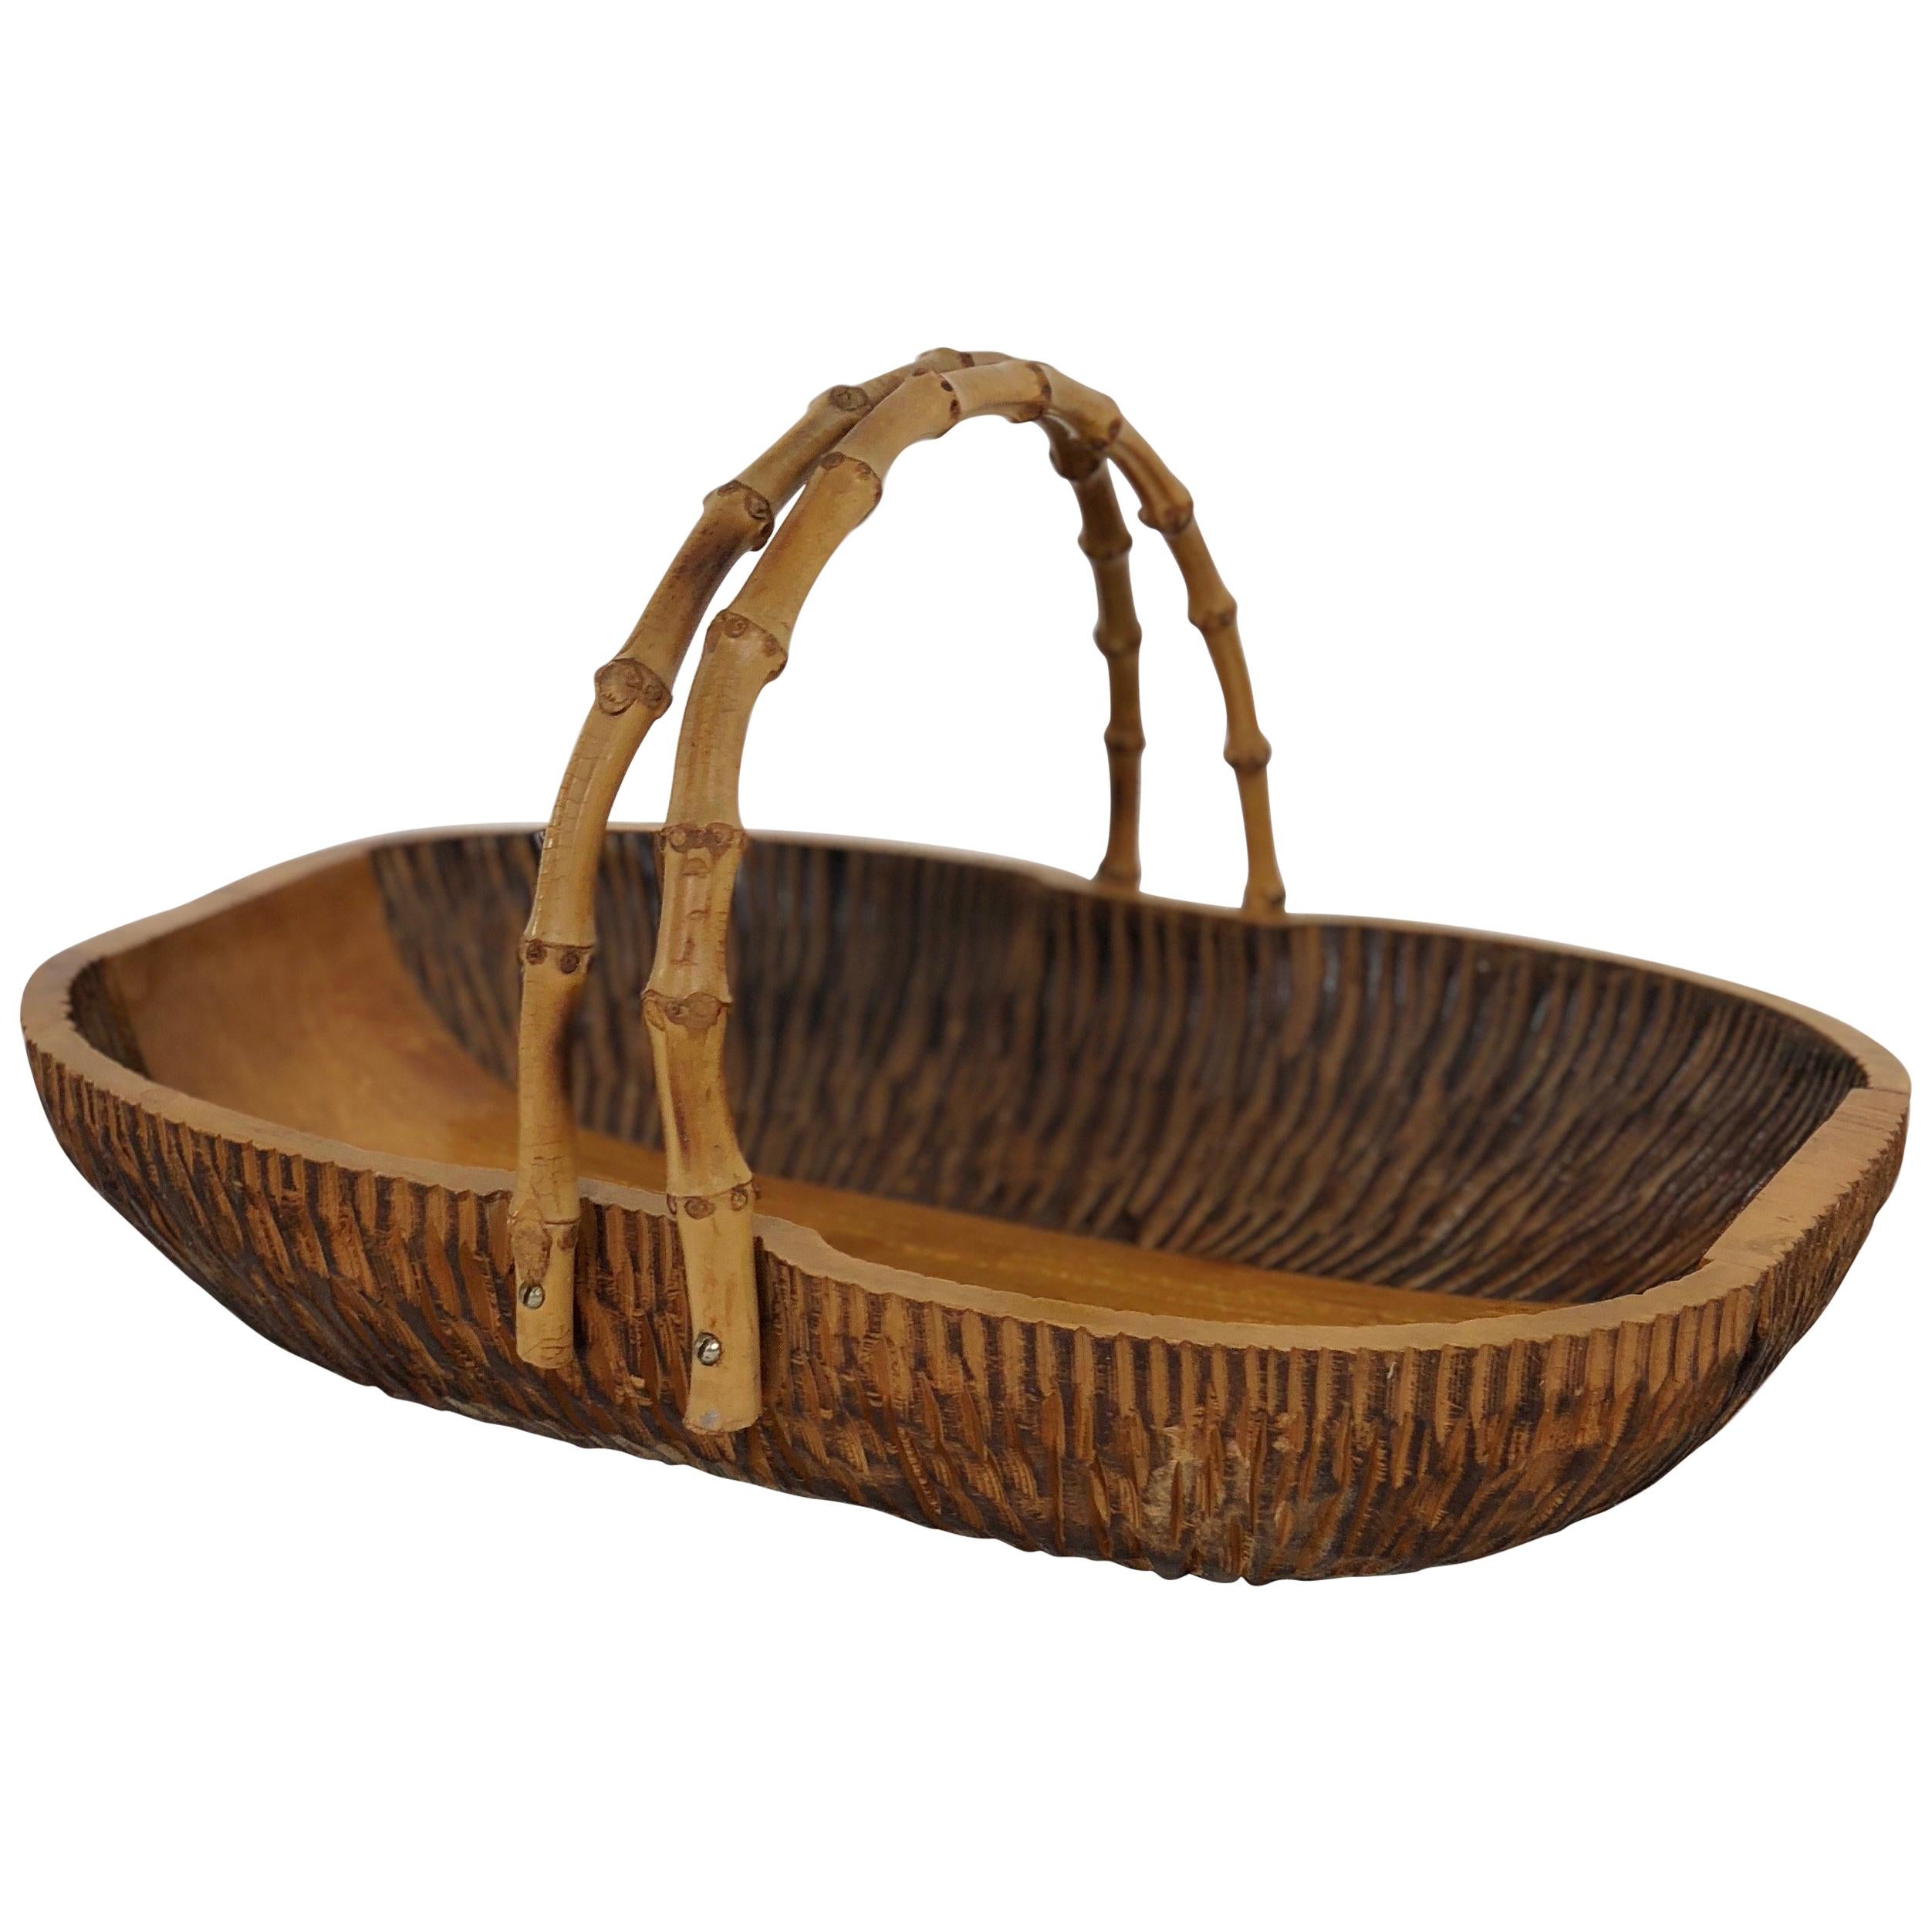 Aldo Tura Macabo Fruit Walnut Bowl Centrepiece Hand Carved Wood and Bamboo Italy